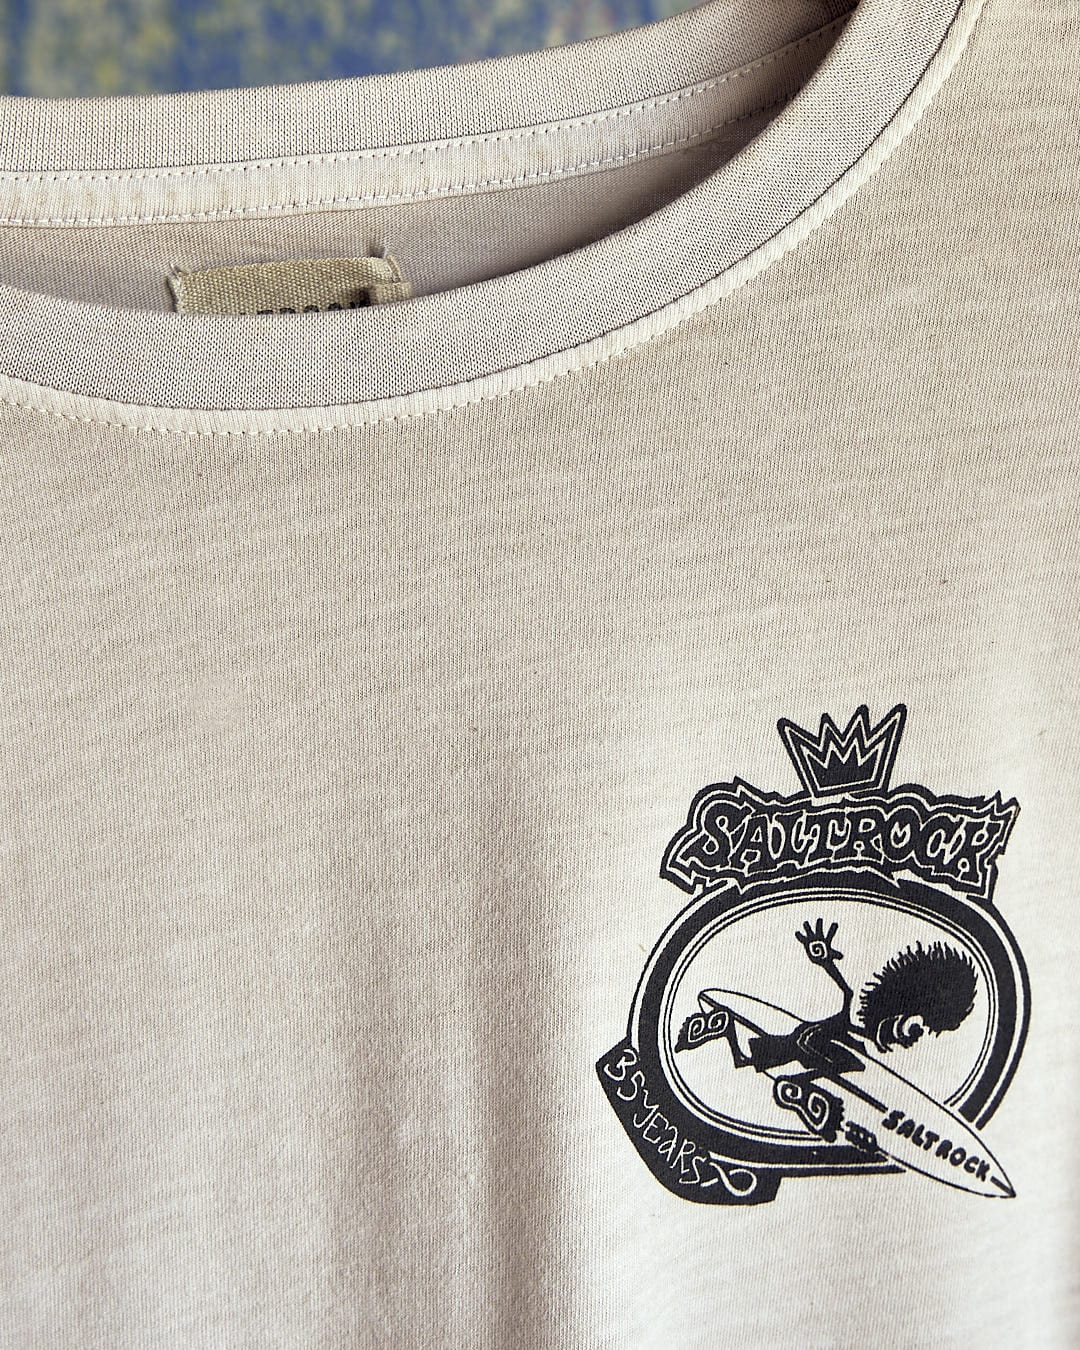 A Balls To The Wall - Limited Edition 35 Years T-Shirt with a crown on it, made by Saltrock.